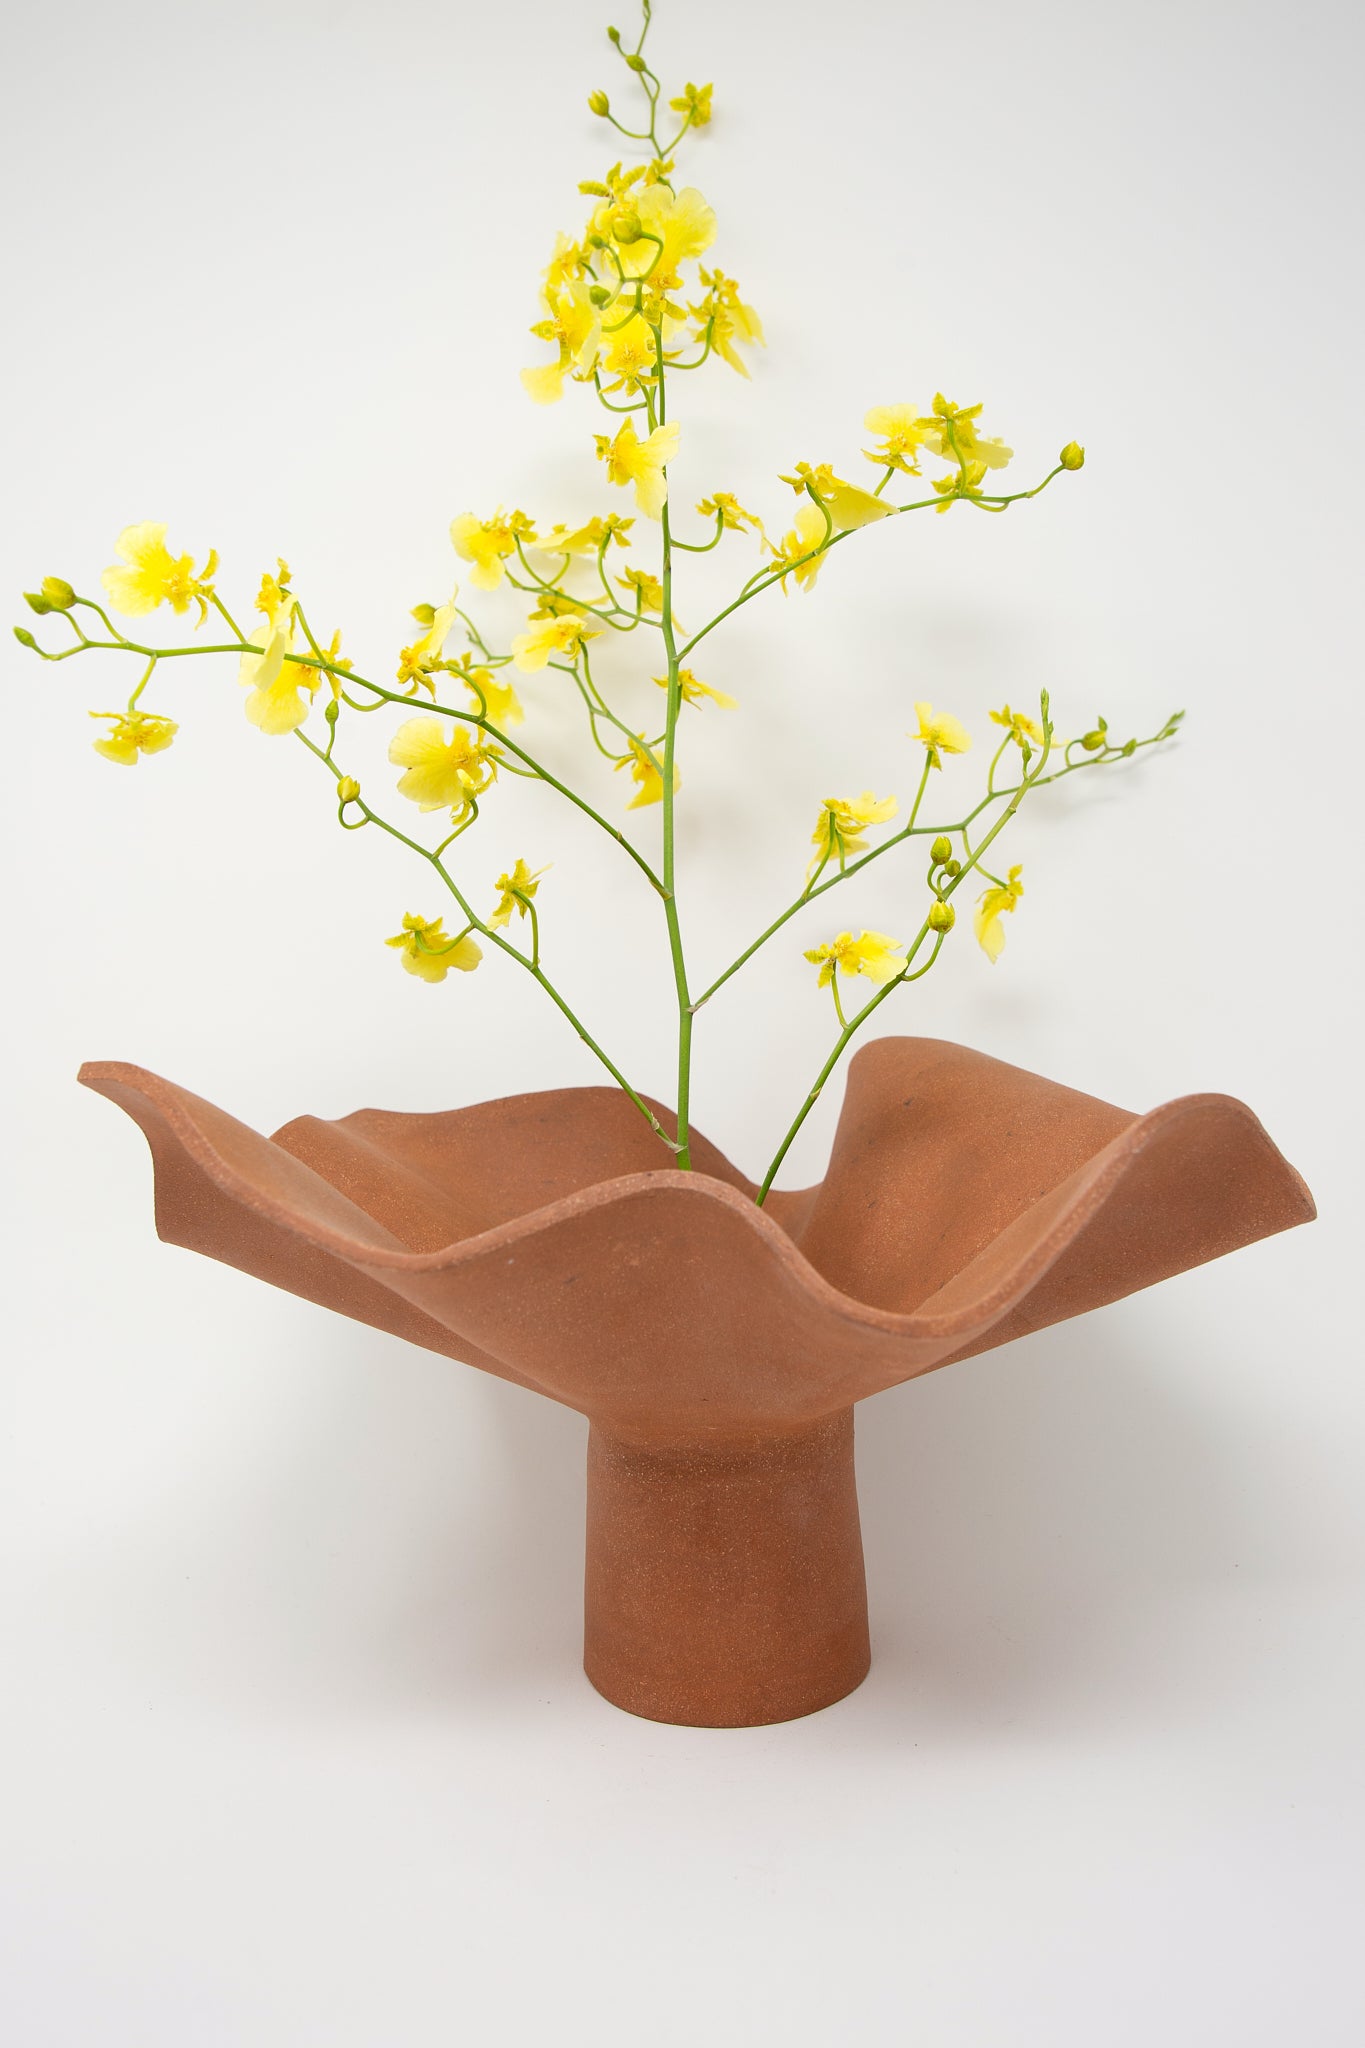 A Lost Quarry handmade sculpture of a yellow flower in a Ruffle Pedestal in Terracotta clay vase.